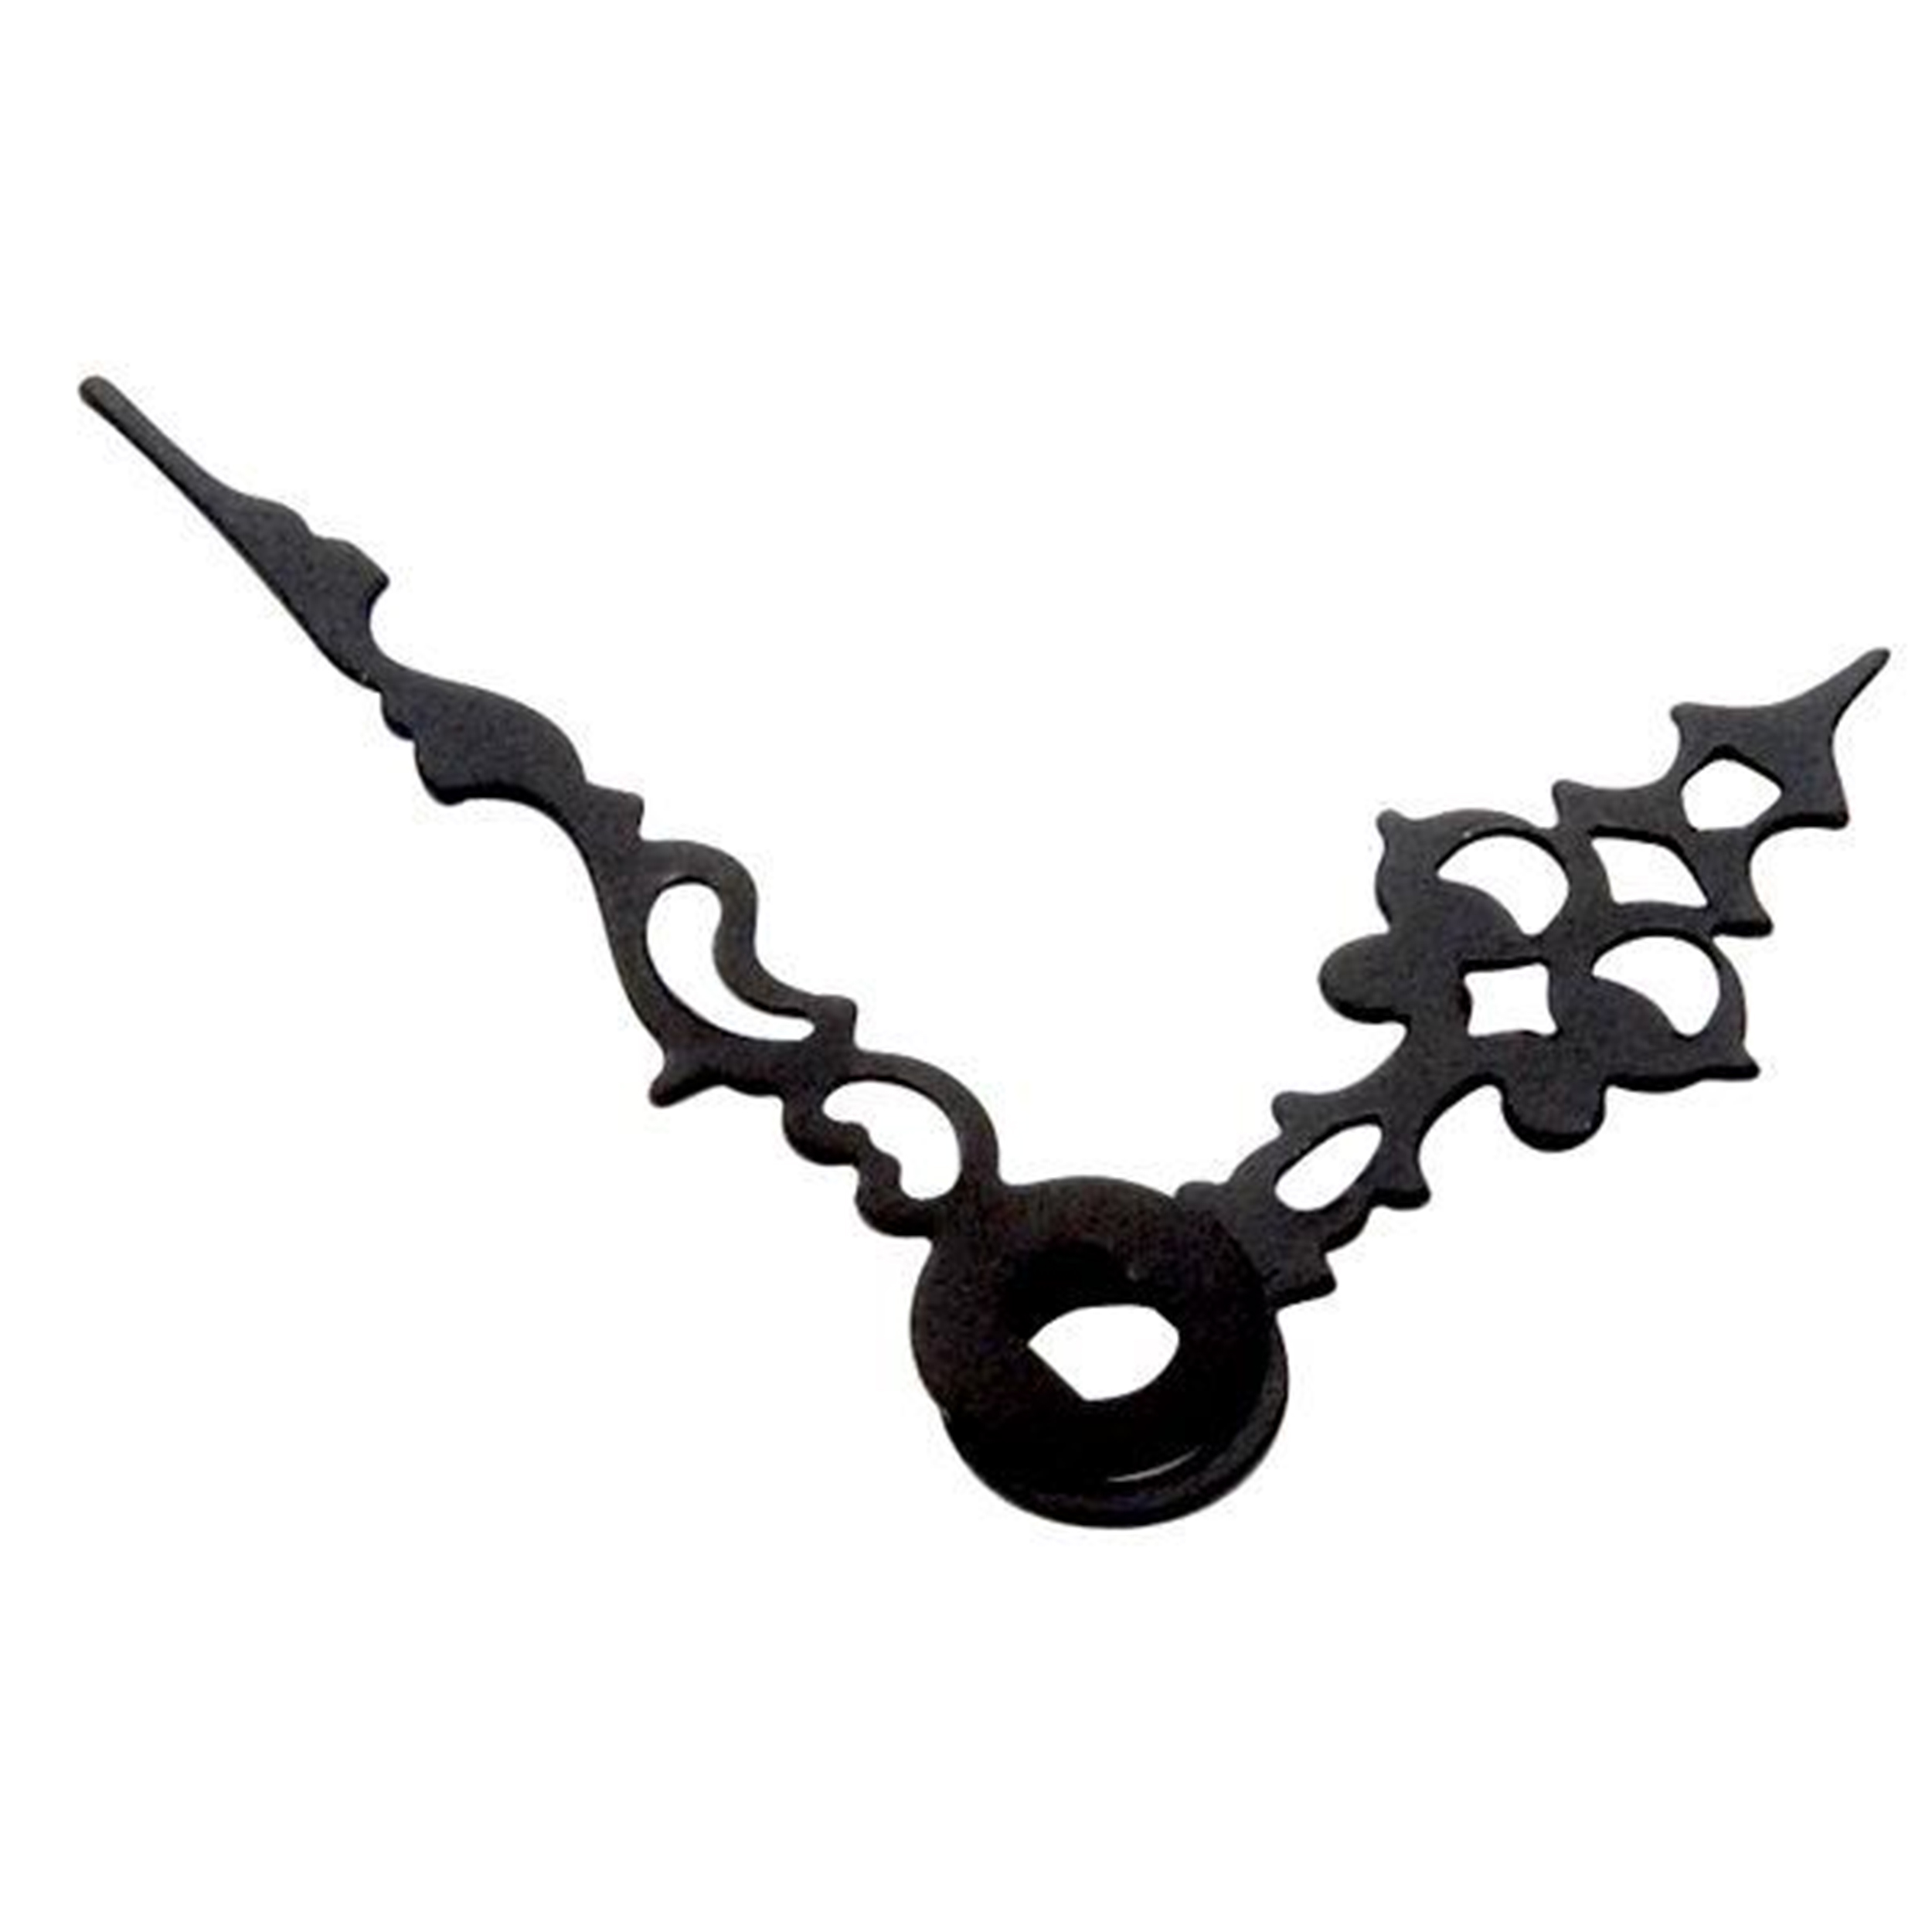 Hands, Black, Serpentine Style - Time Ring 9-1/2" -10-1/4"